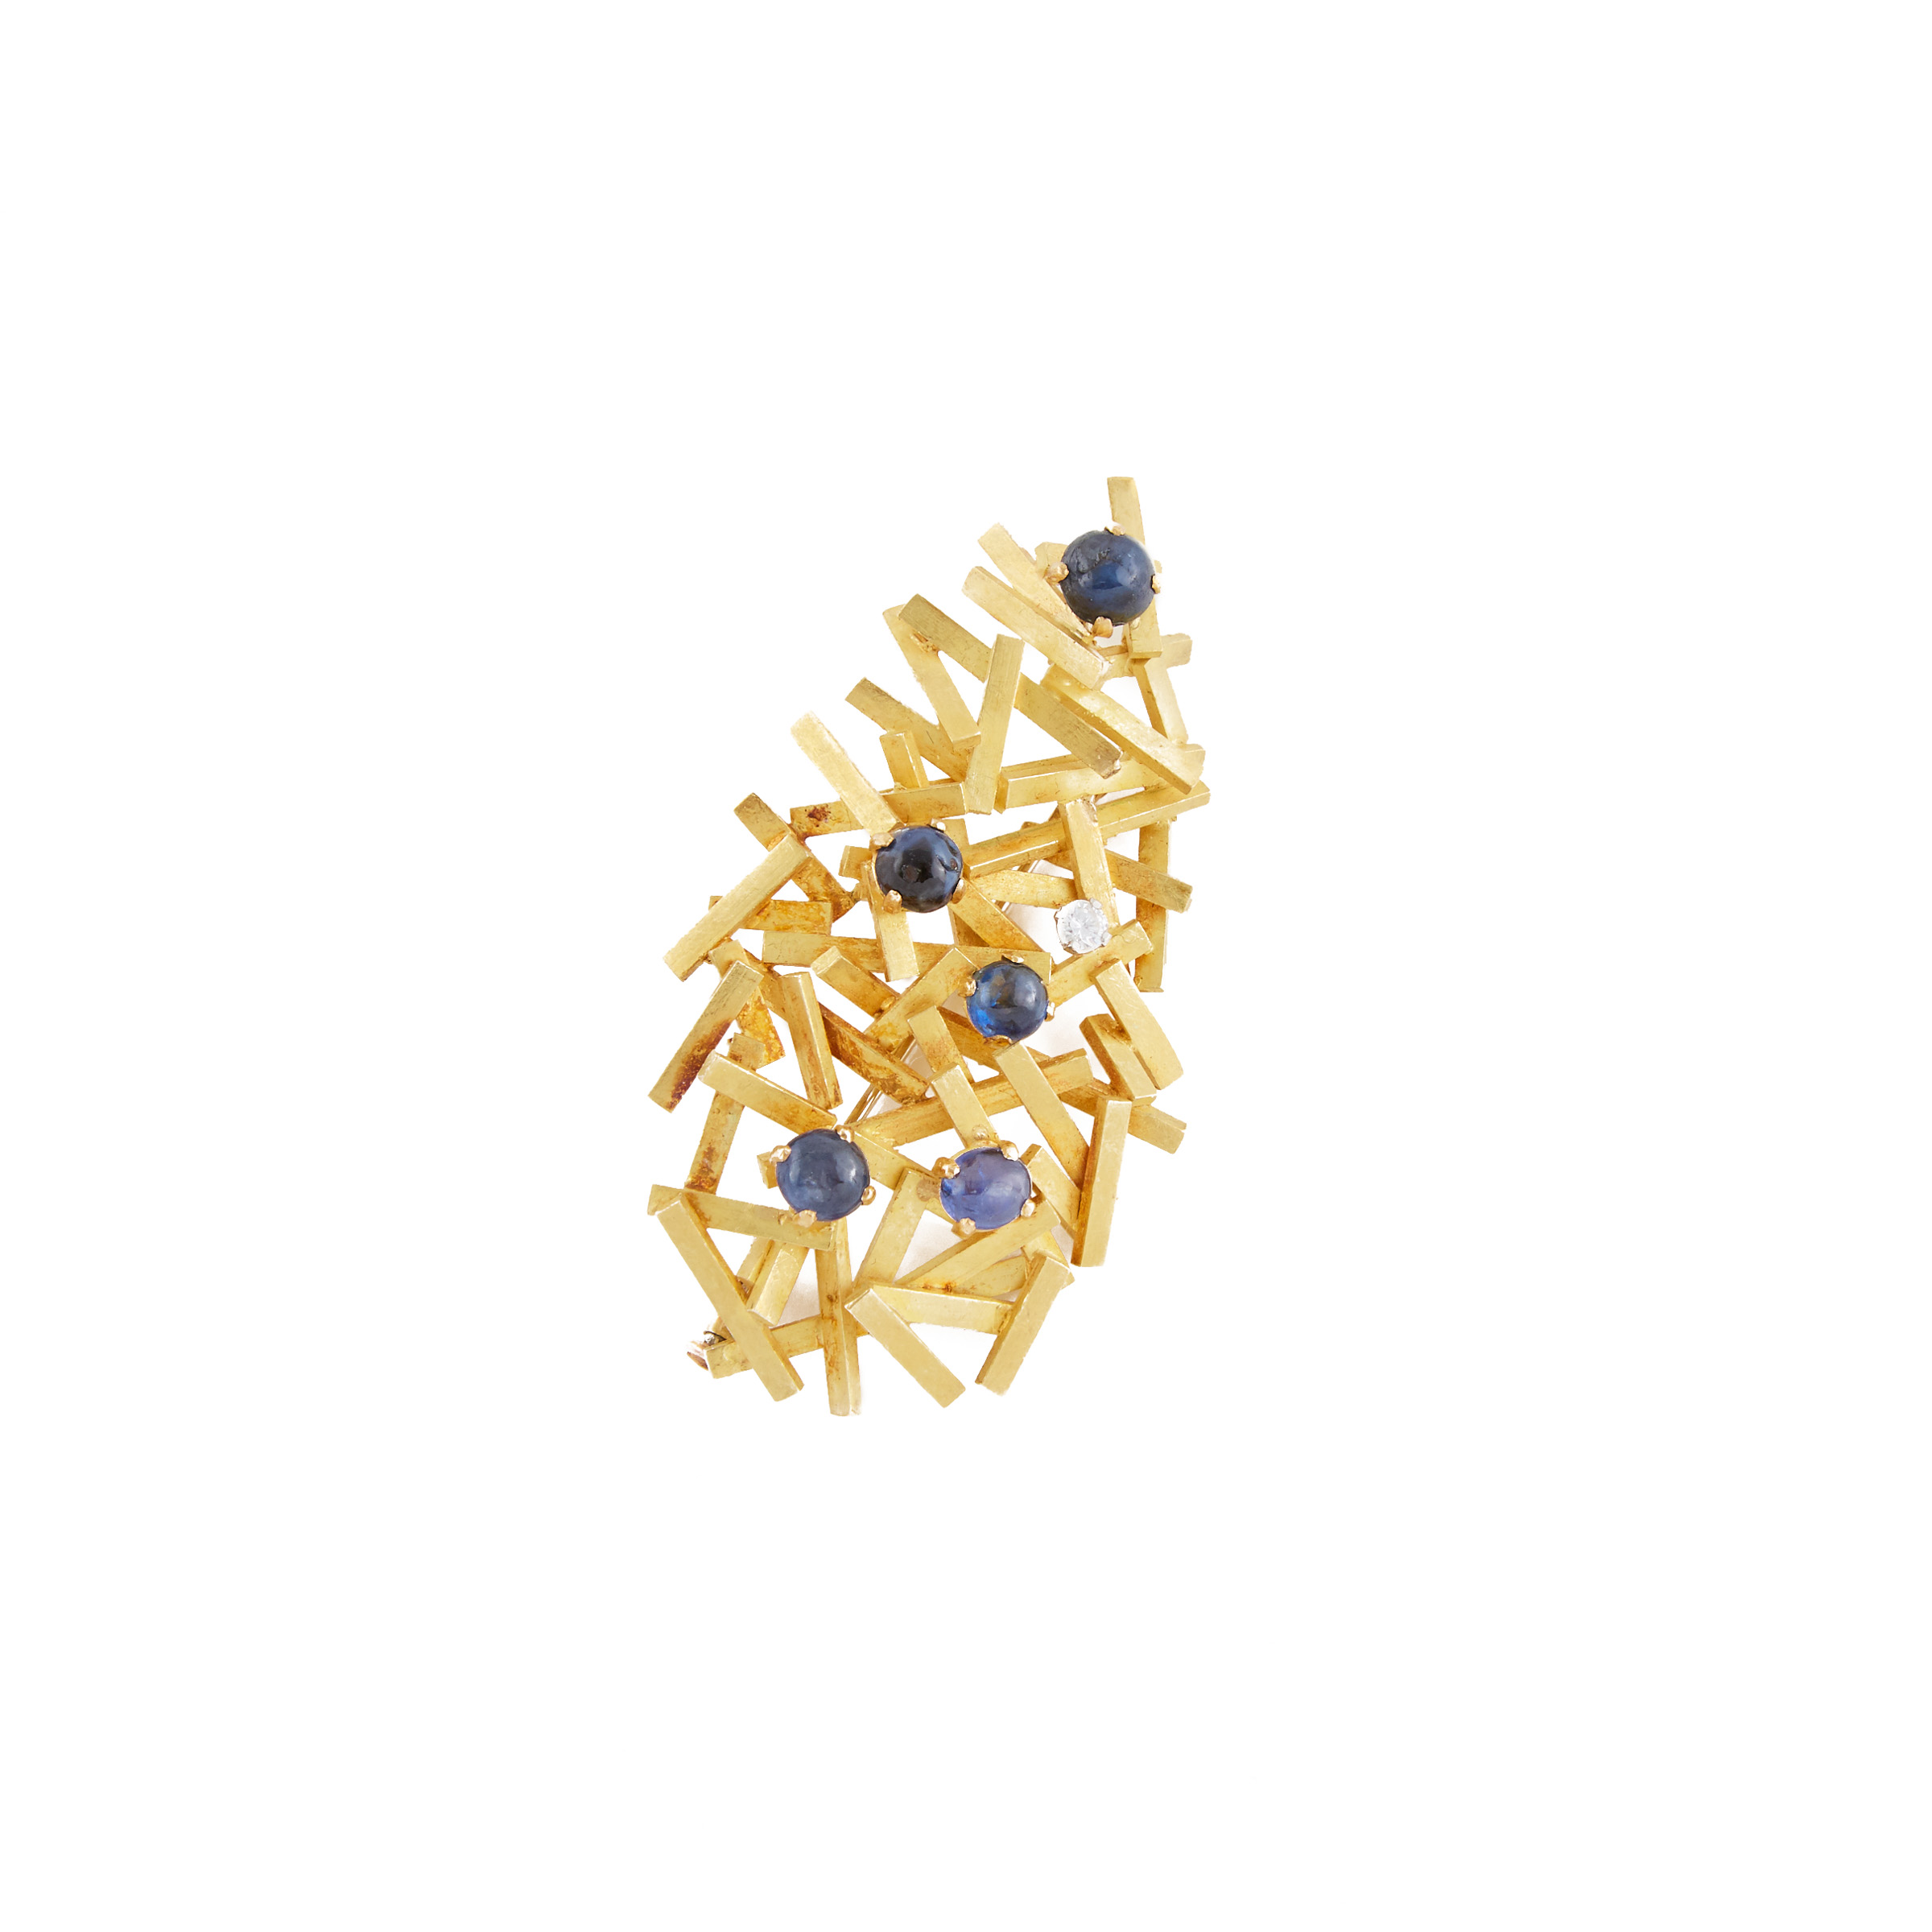 Grima 18K Yellow Gold Abstract Brooch/Pendant